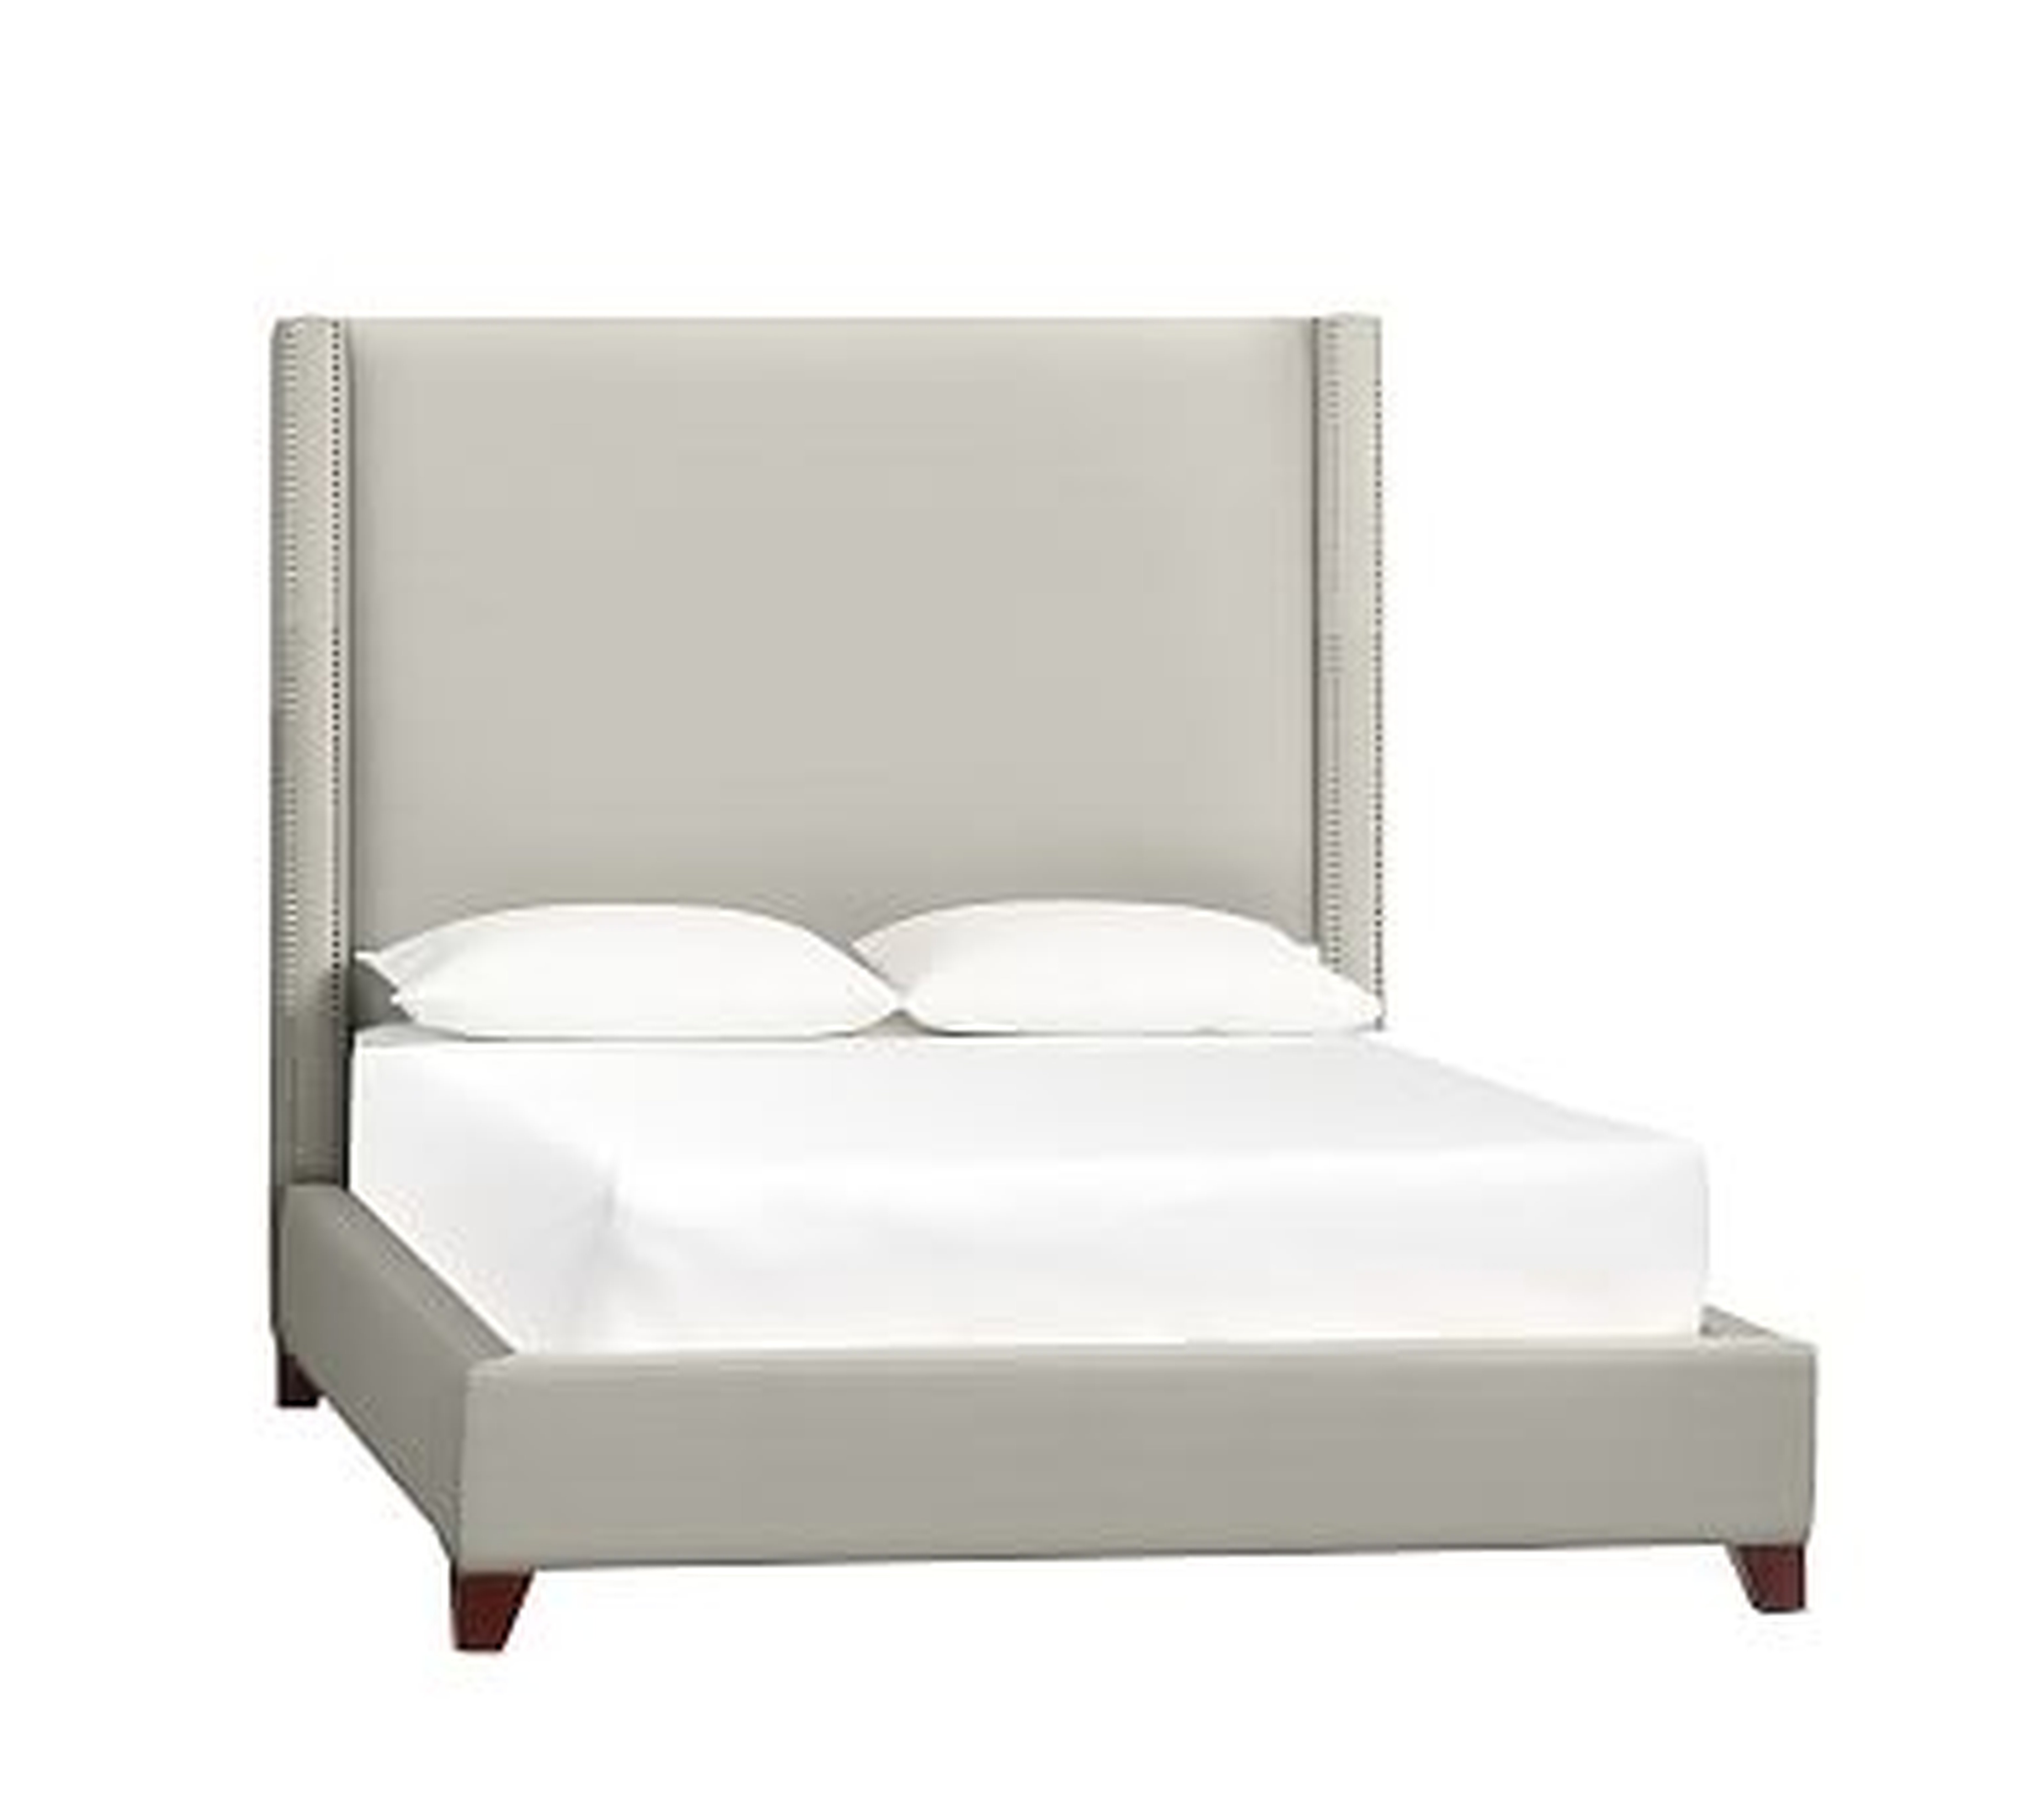 Harper Non-Tufted Upholstered Bed with Bronze Nailheads, King, Basketweave Slub Oatmeal - Pottery Barn